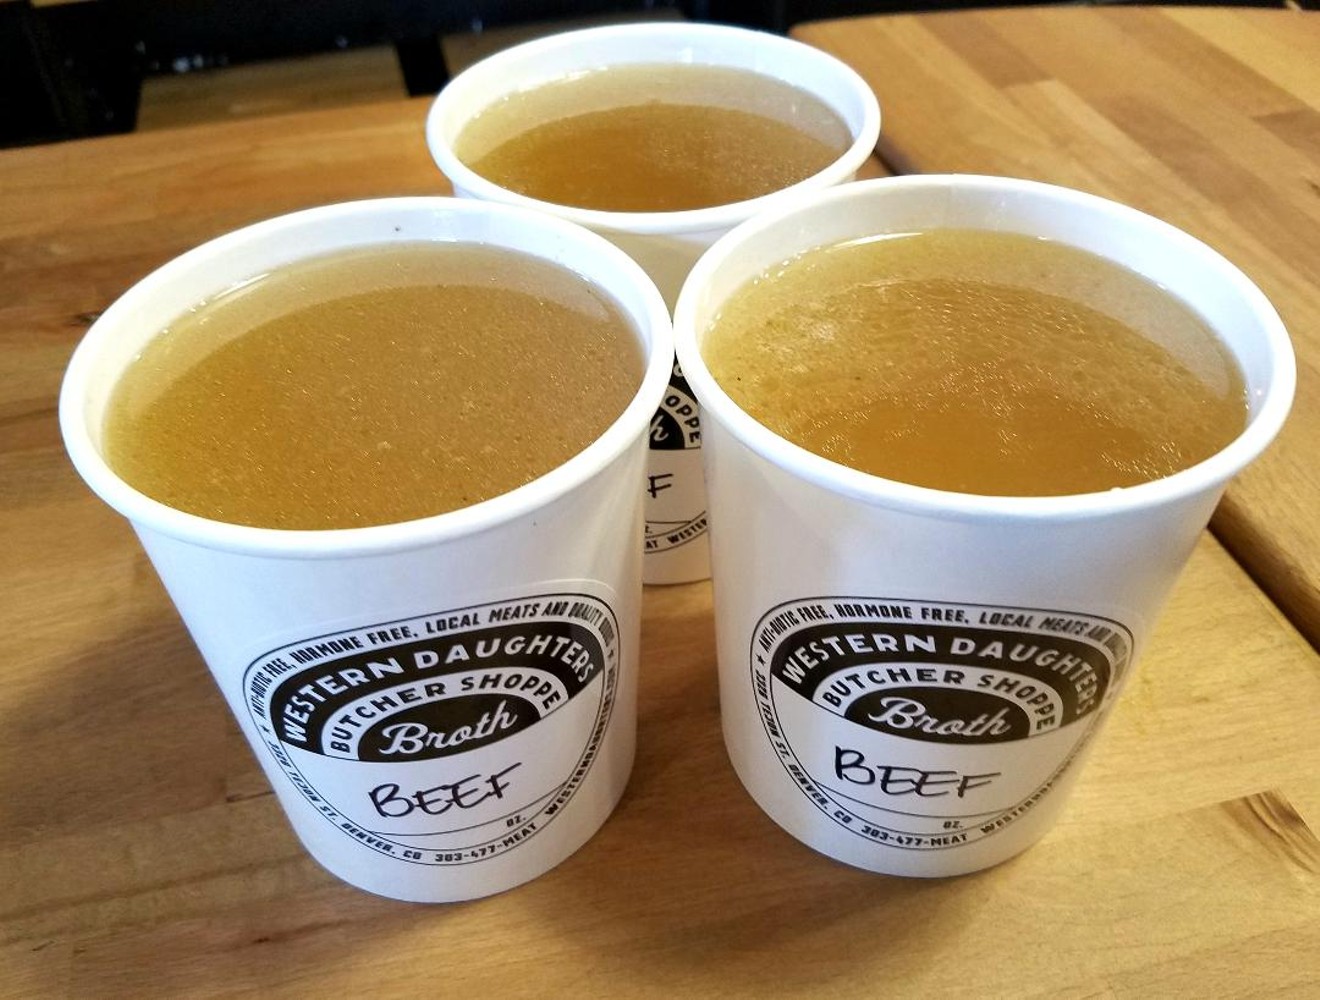 Quarts of beef-bone broth from Western Daughters Butcher Shoppe.